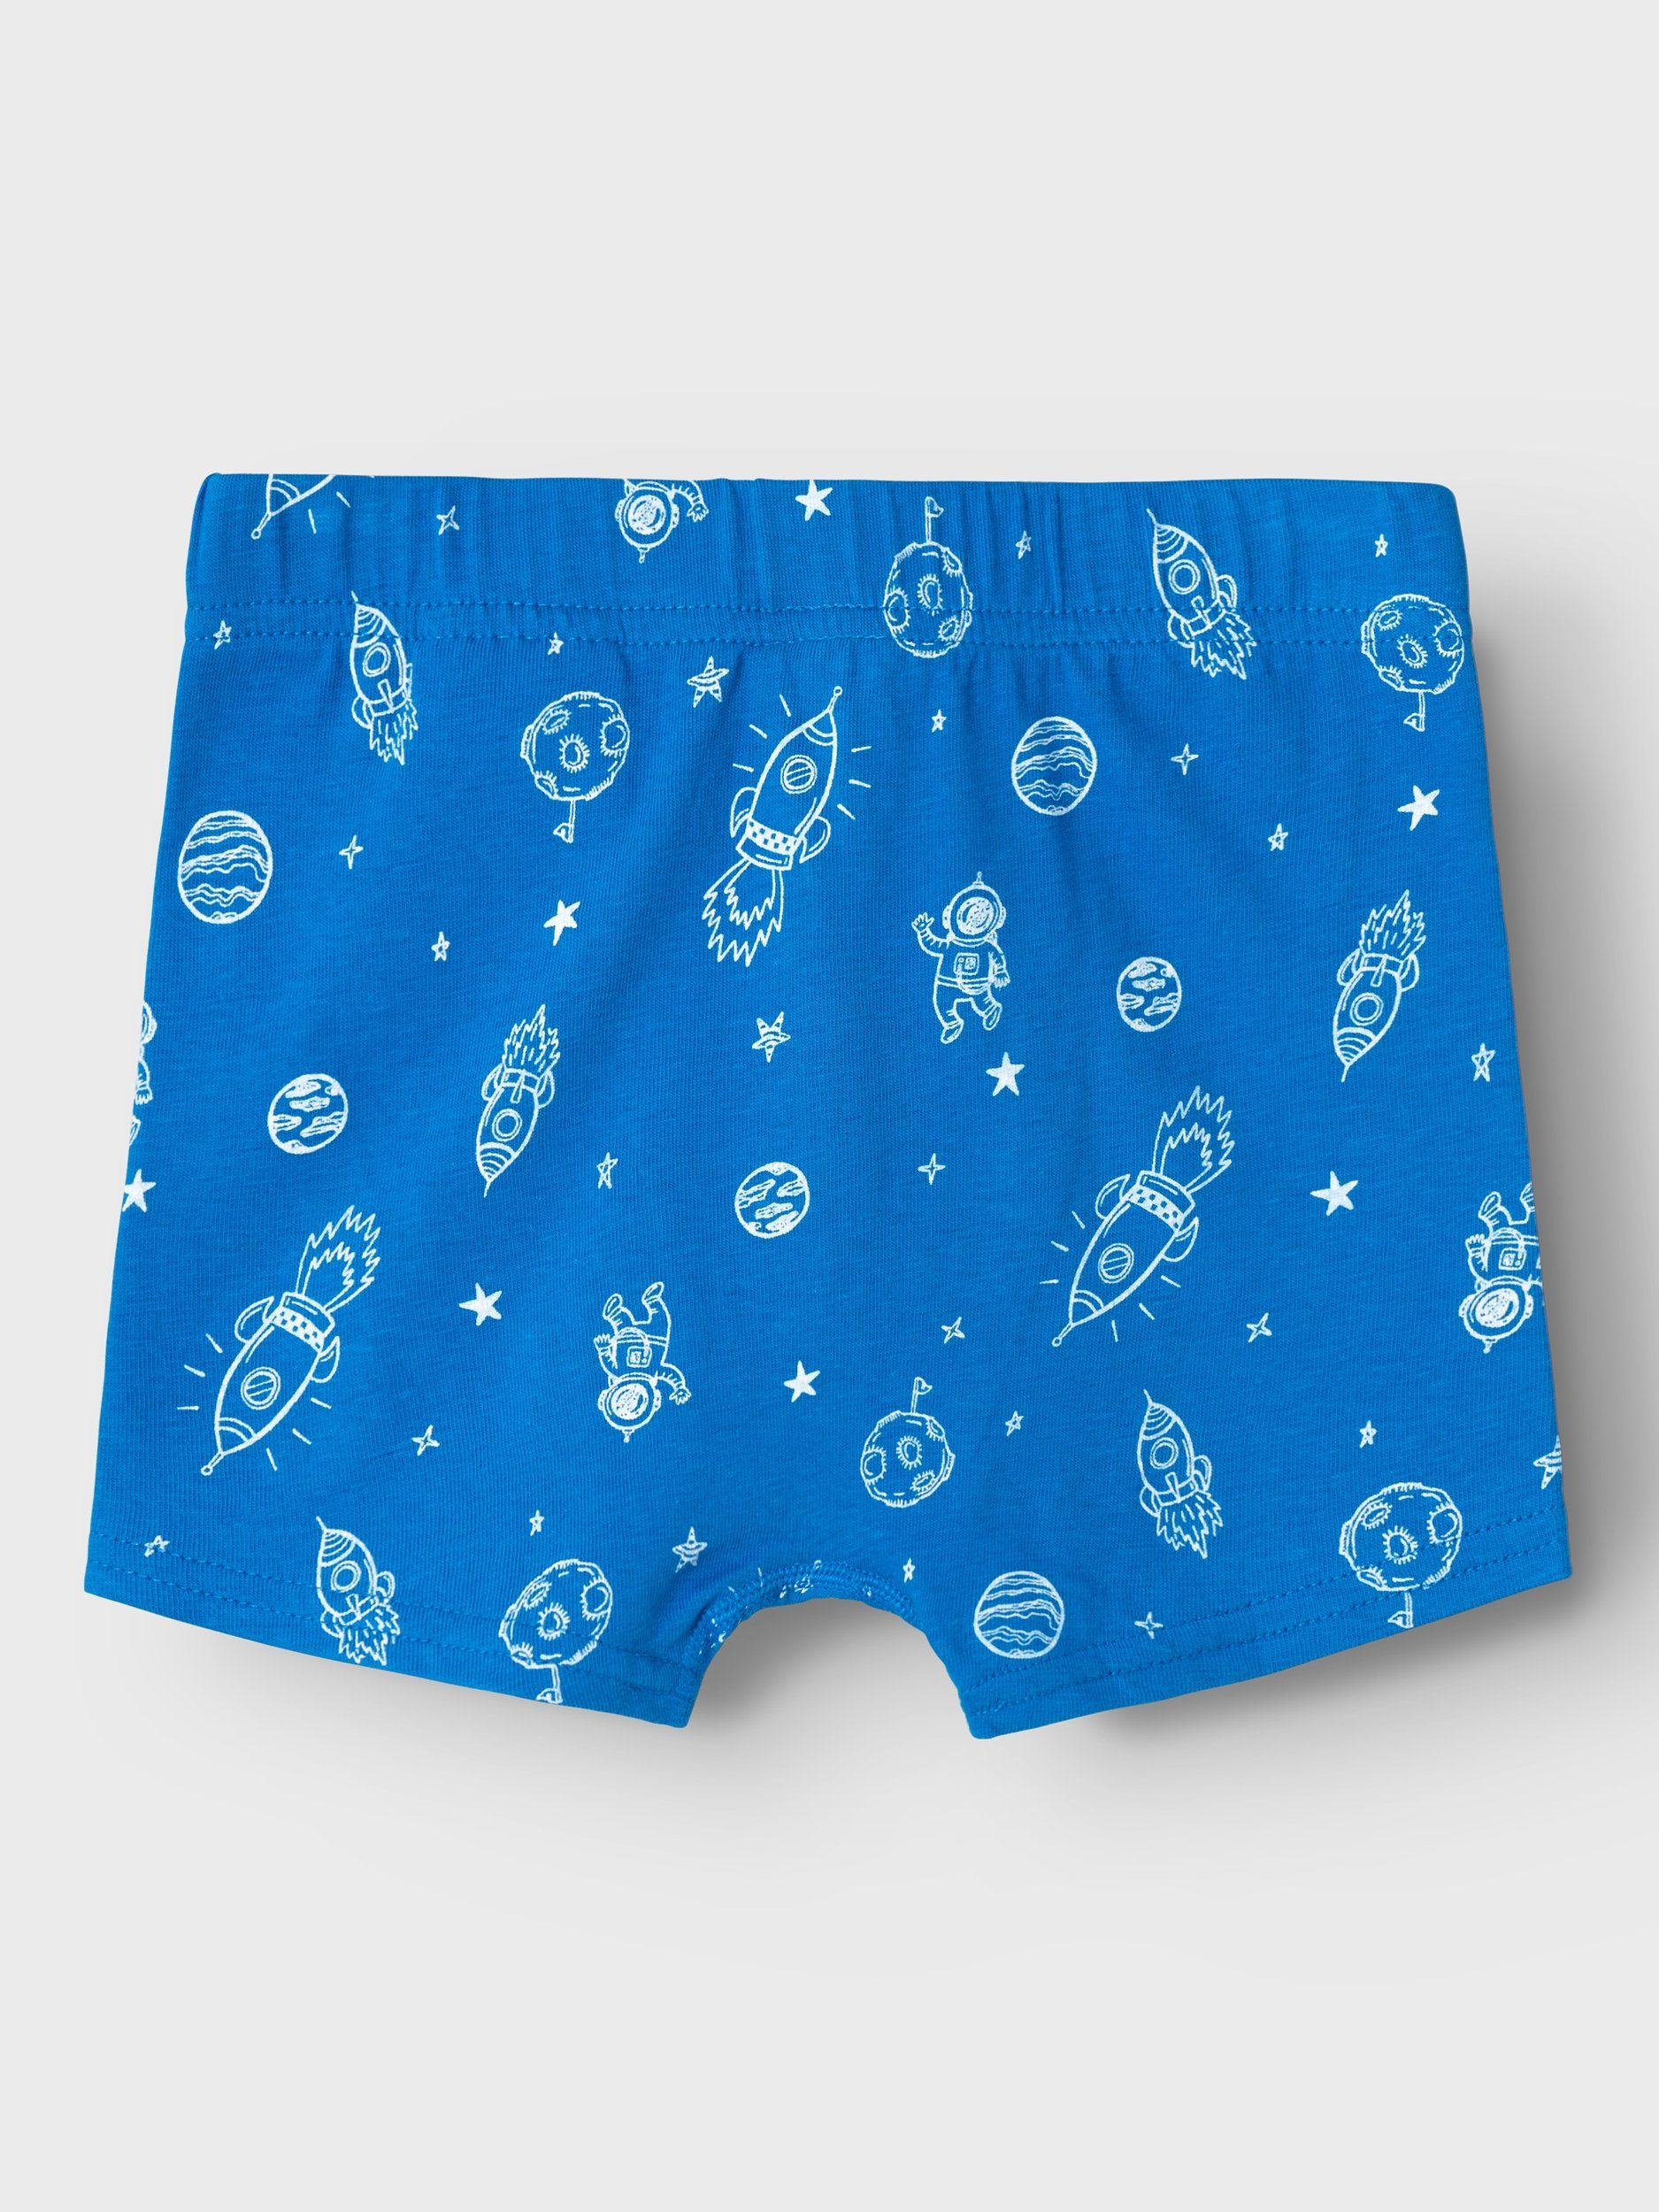 SKYDIVER Name Boxershorts 3-St) (Packung, It SPACE NMMTIGHTS 3P NOOS